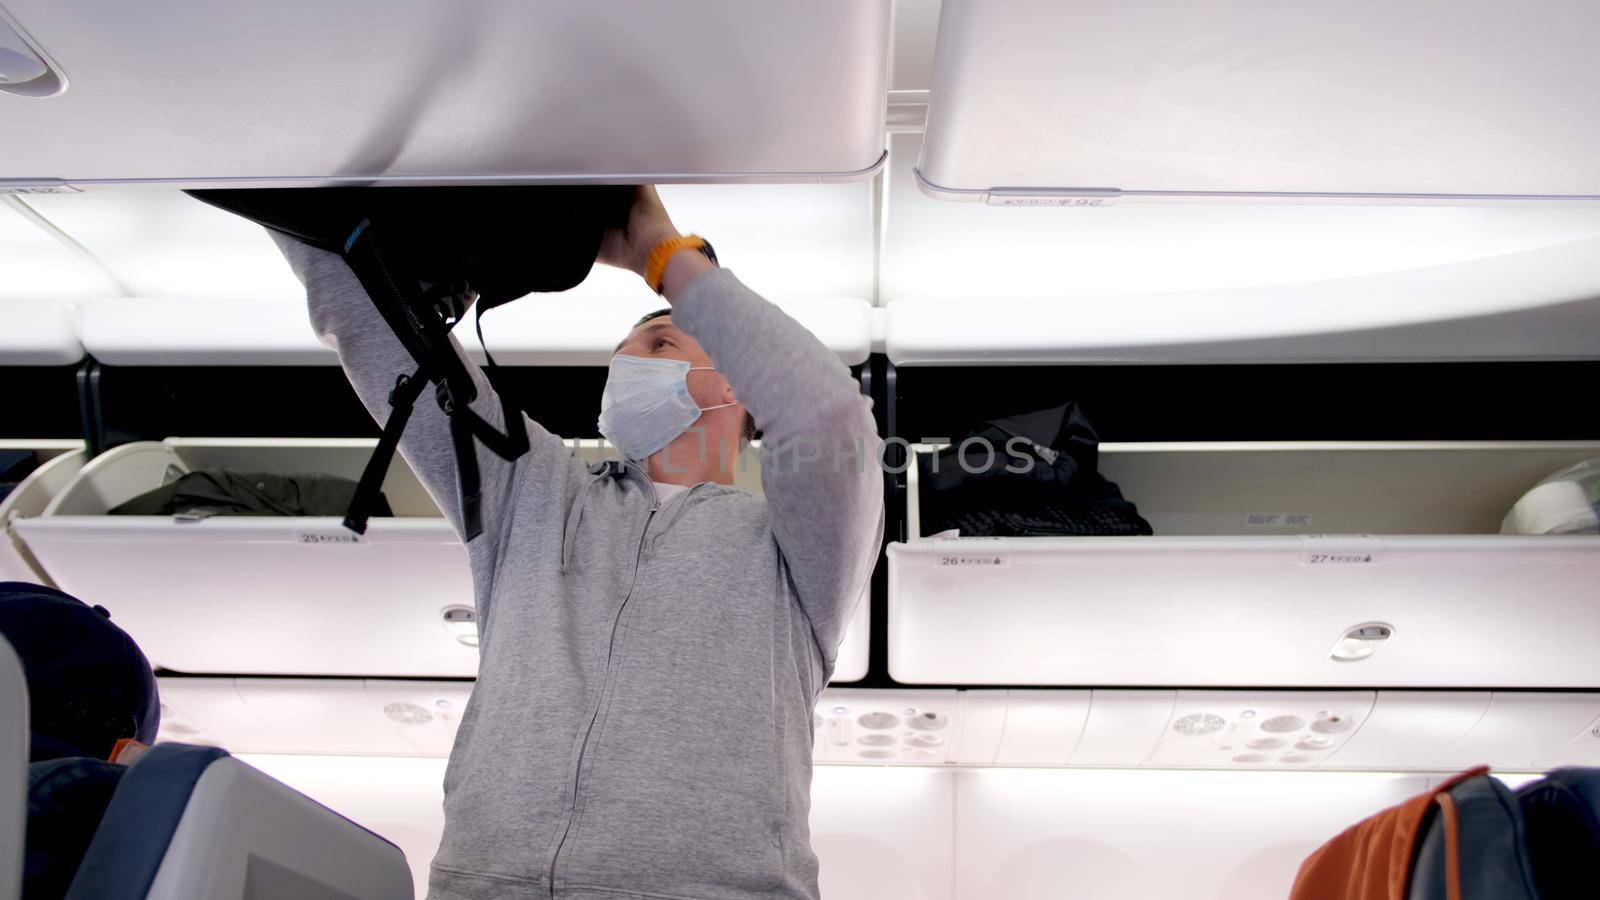 Man with mask puts large backpack on aircraft luggage rack by Demkat